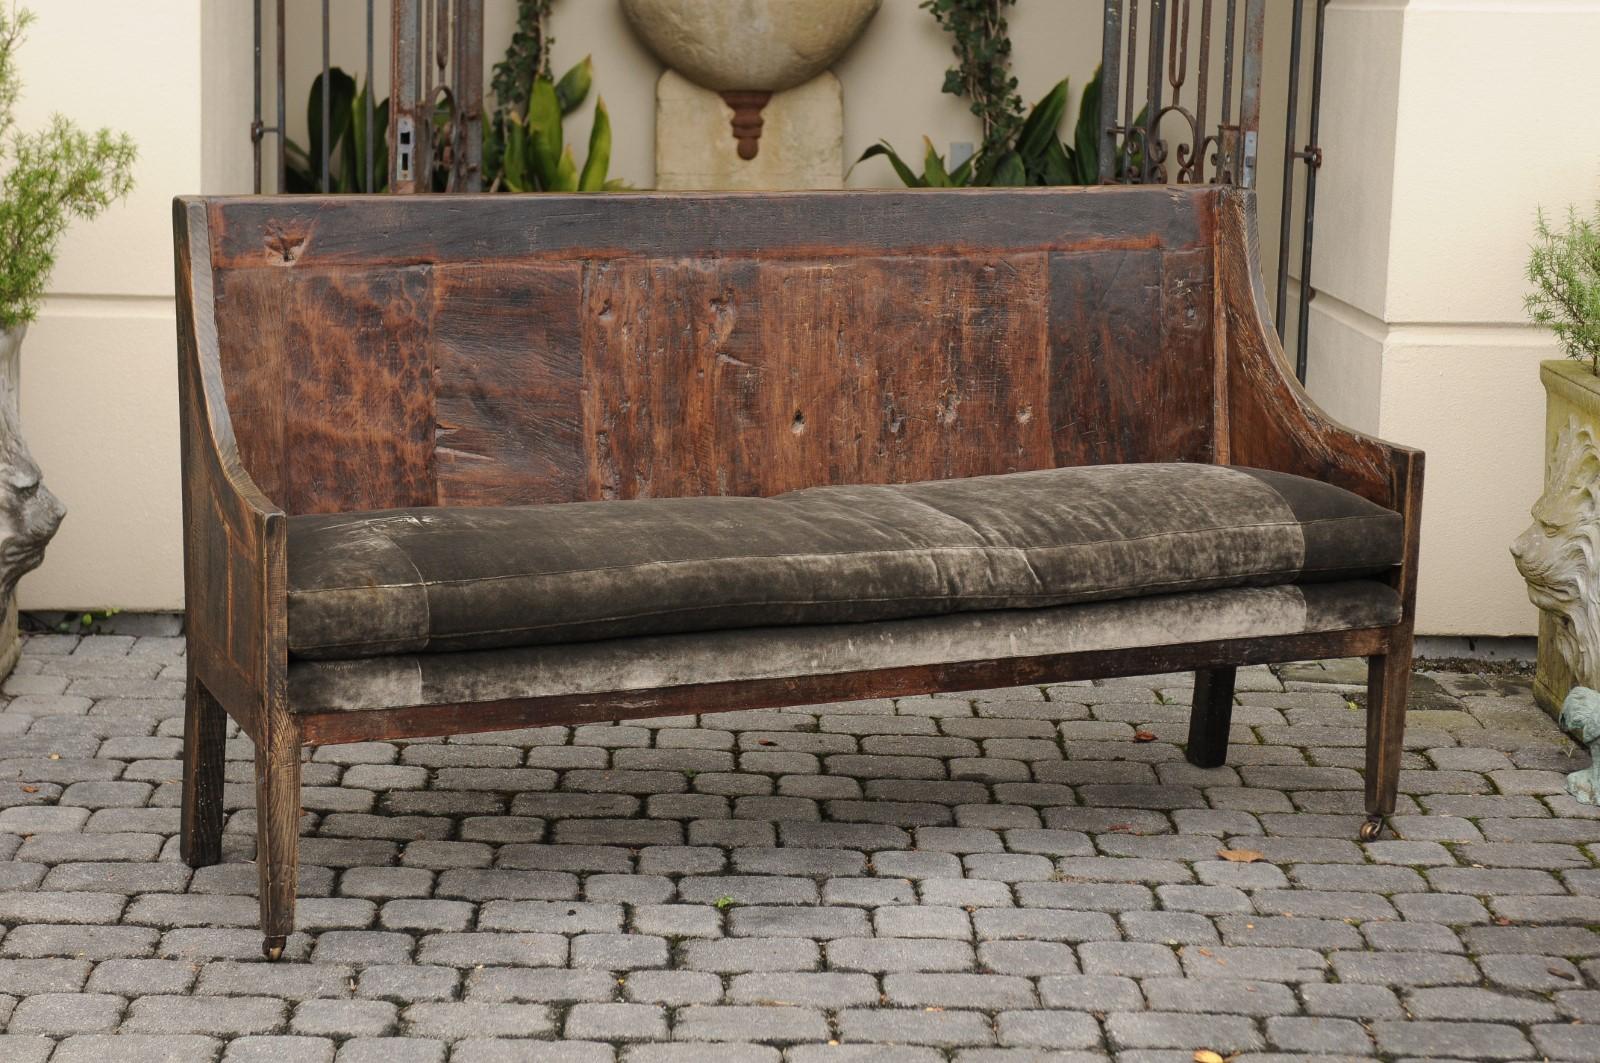 18th Century English George III Period Chestnut Bench circa 1780 with Upholstery and Casters